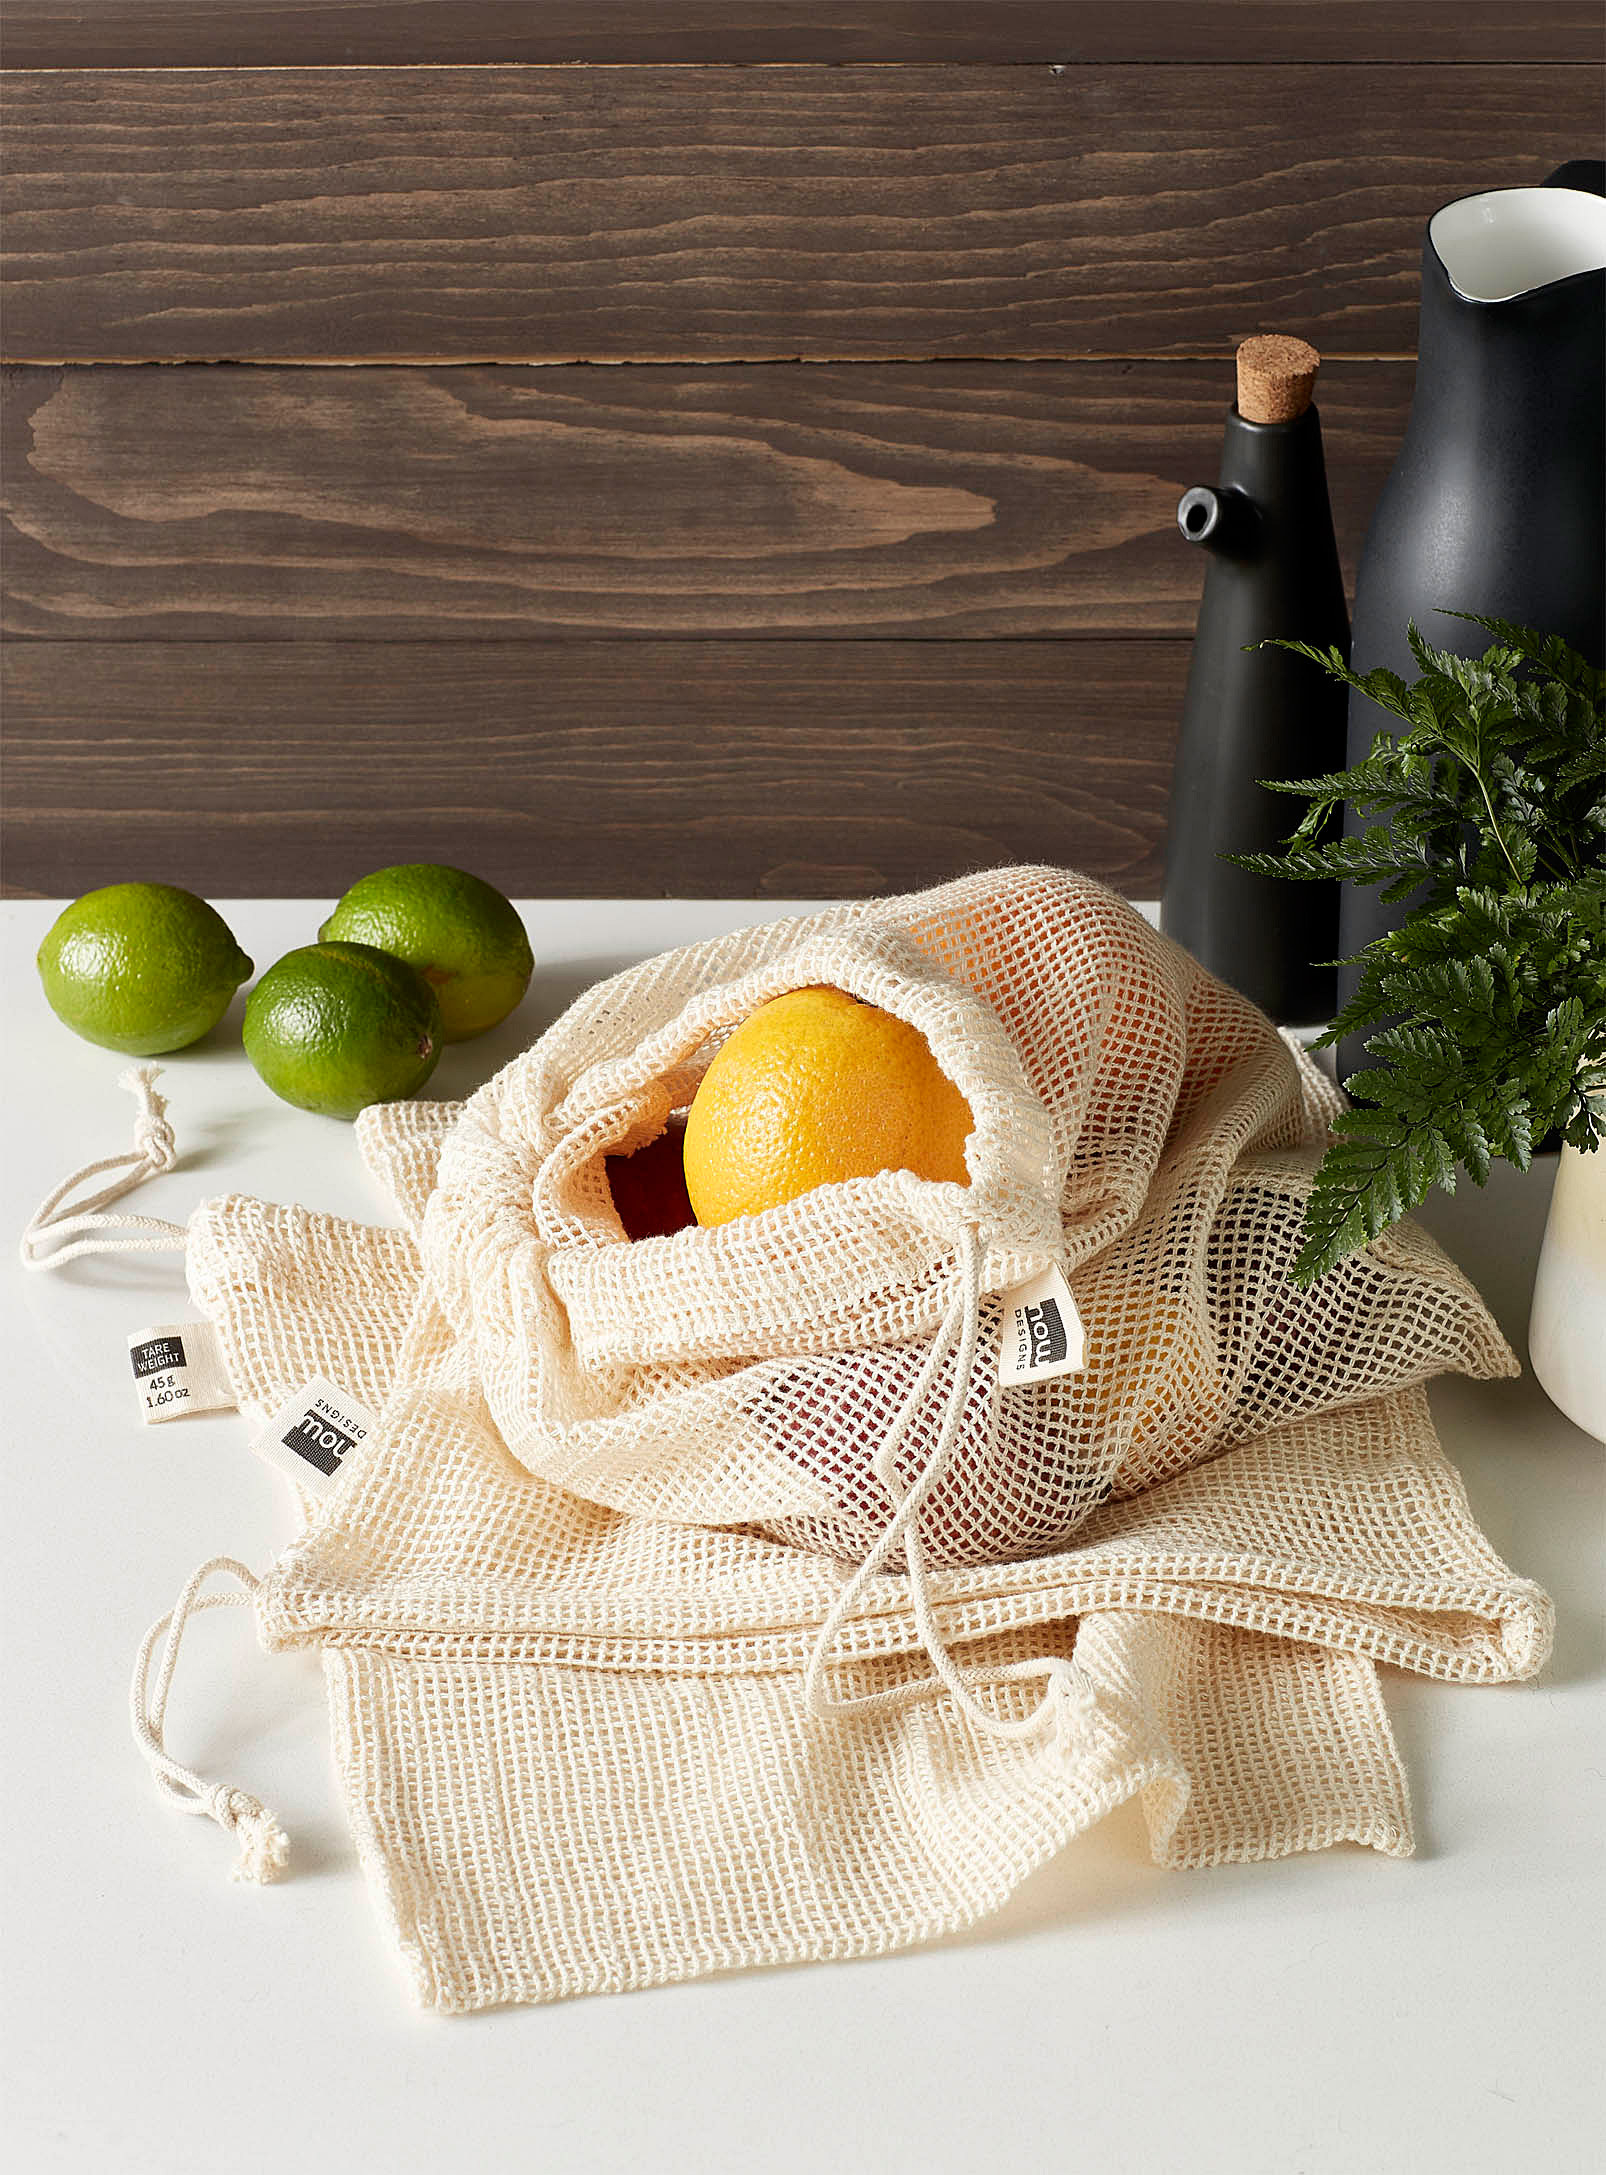 A small mesh bag filled with fruits